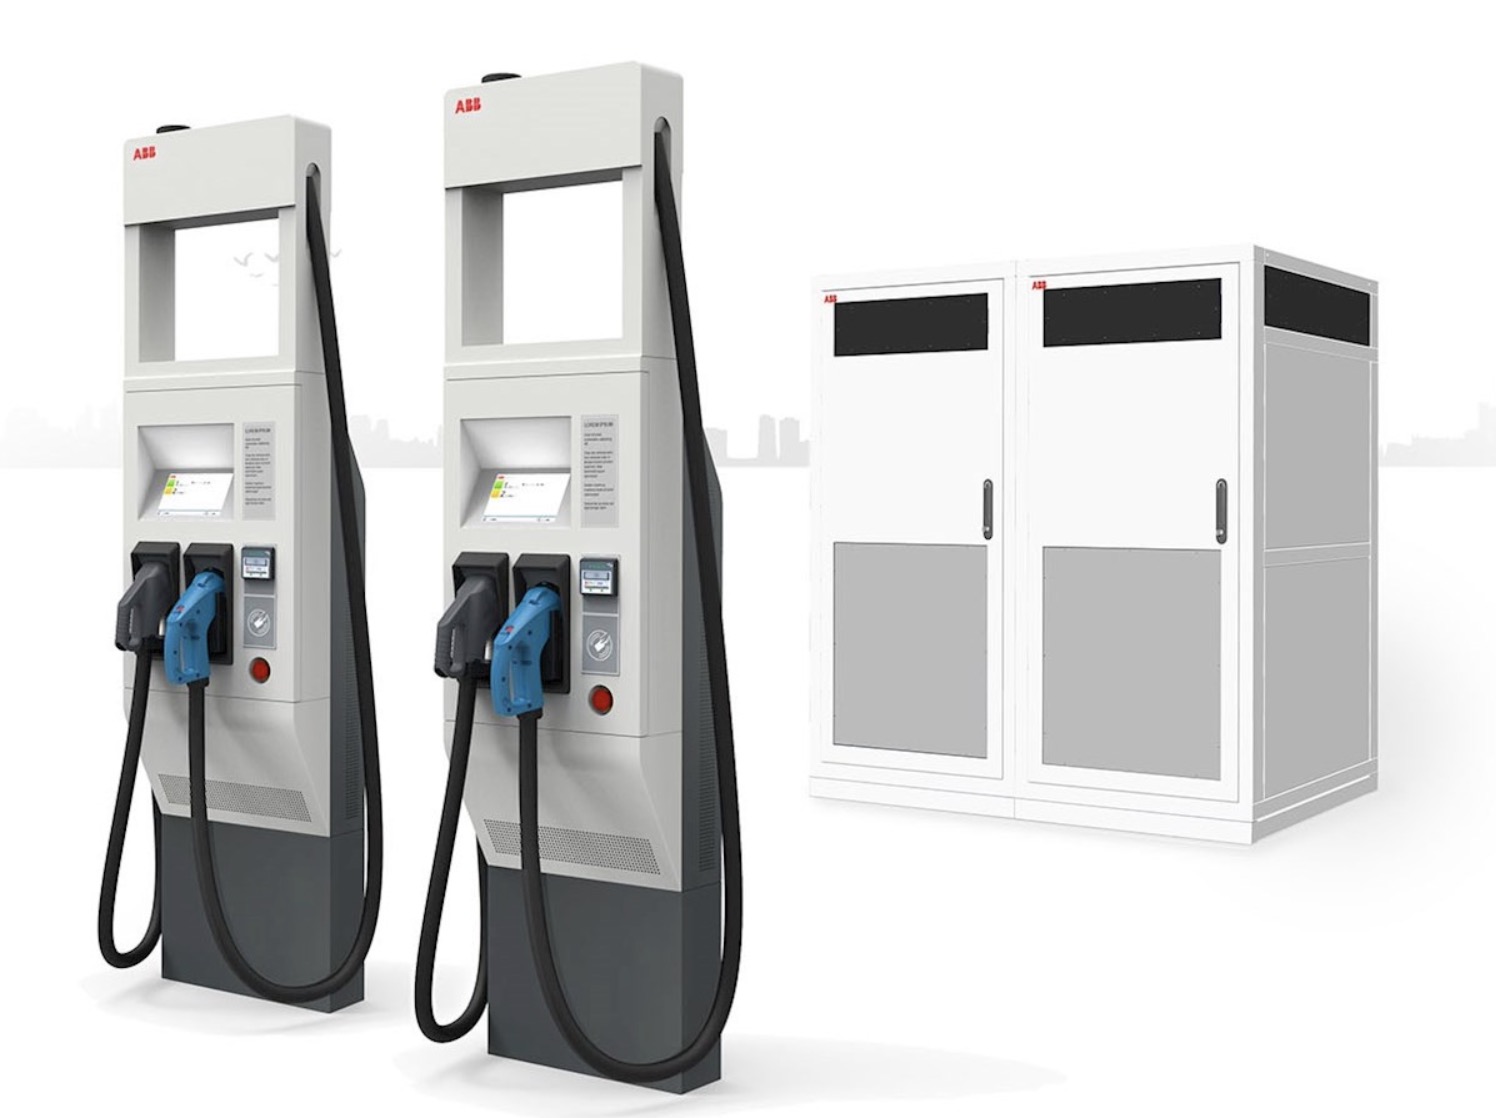 ABB unveils its 350 kW electric vehicle charging tech, claims 200 km of